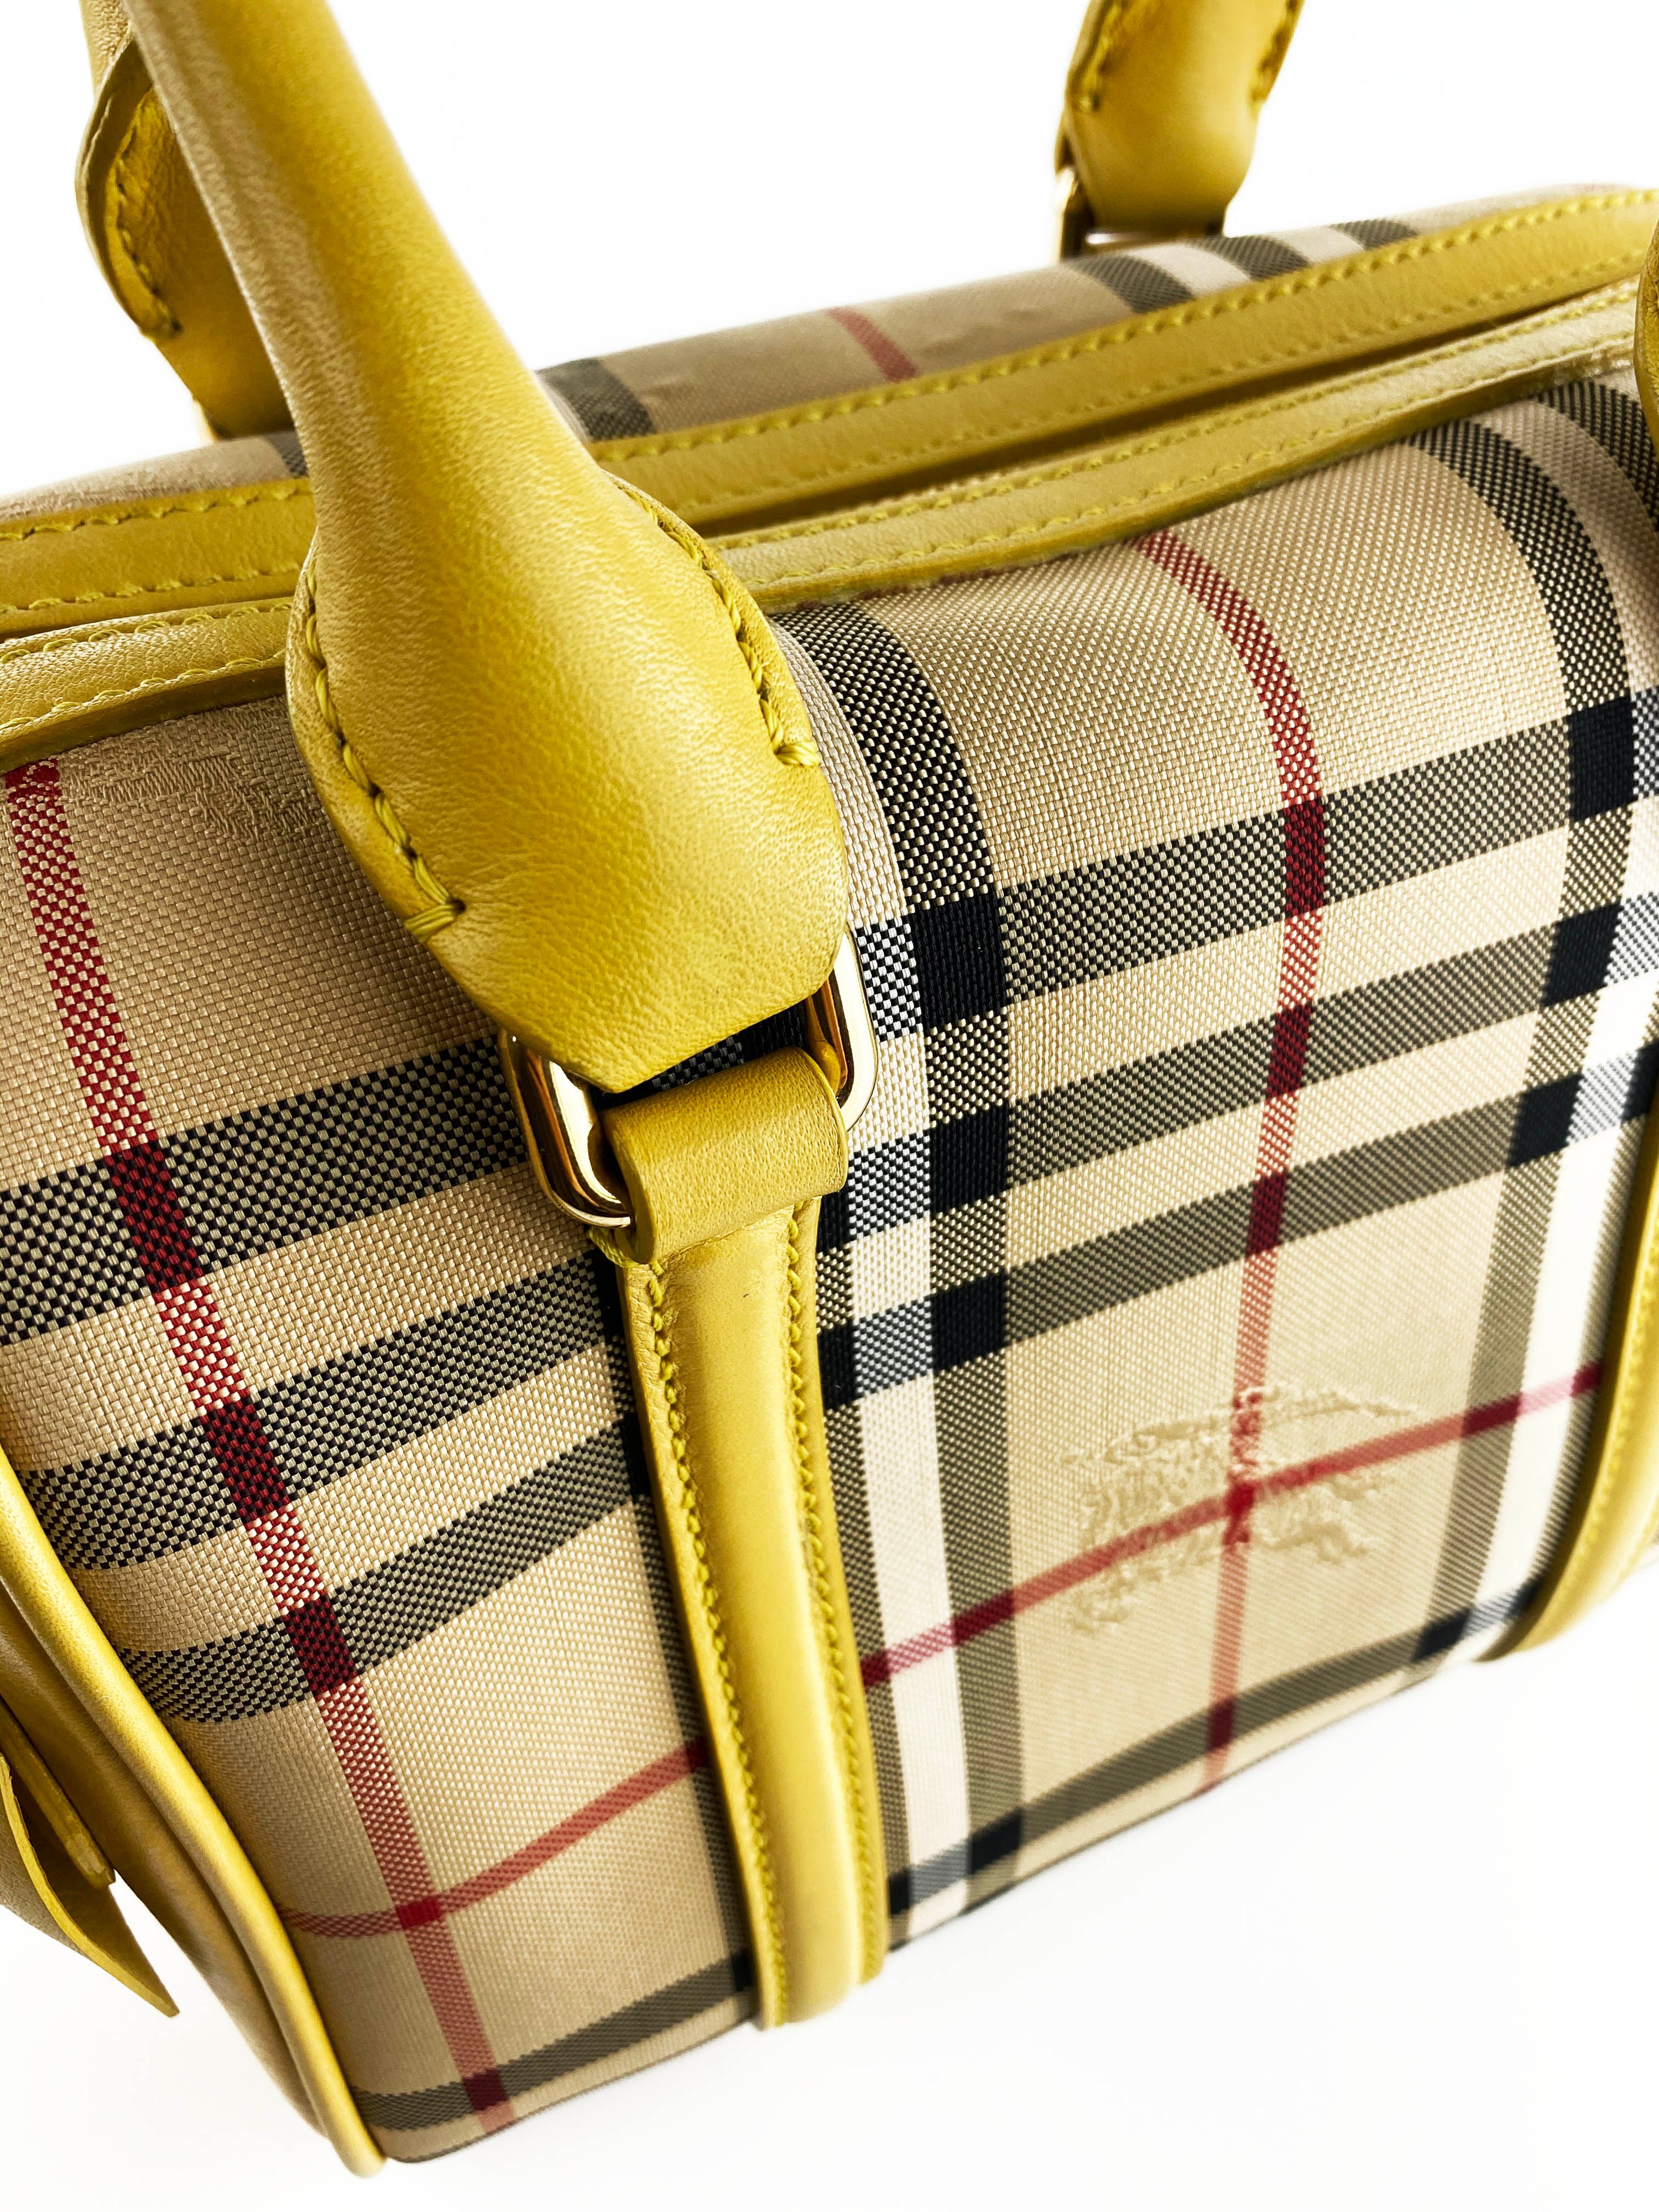 Burberry Horseferry Yellow and Check Mini Bee Bow Bag